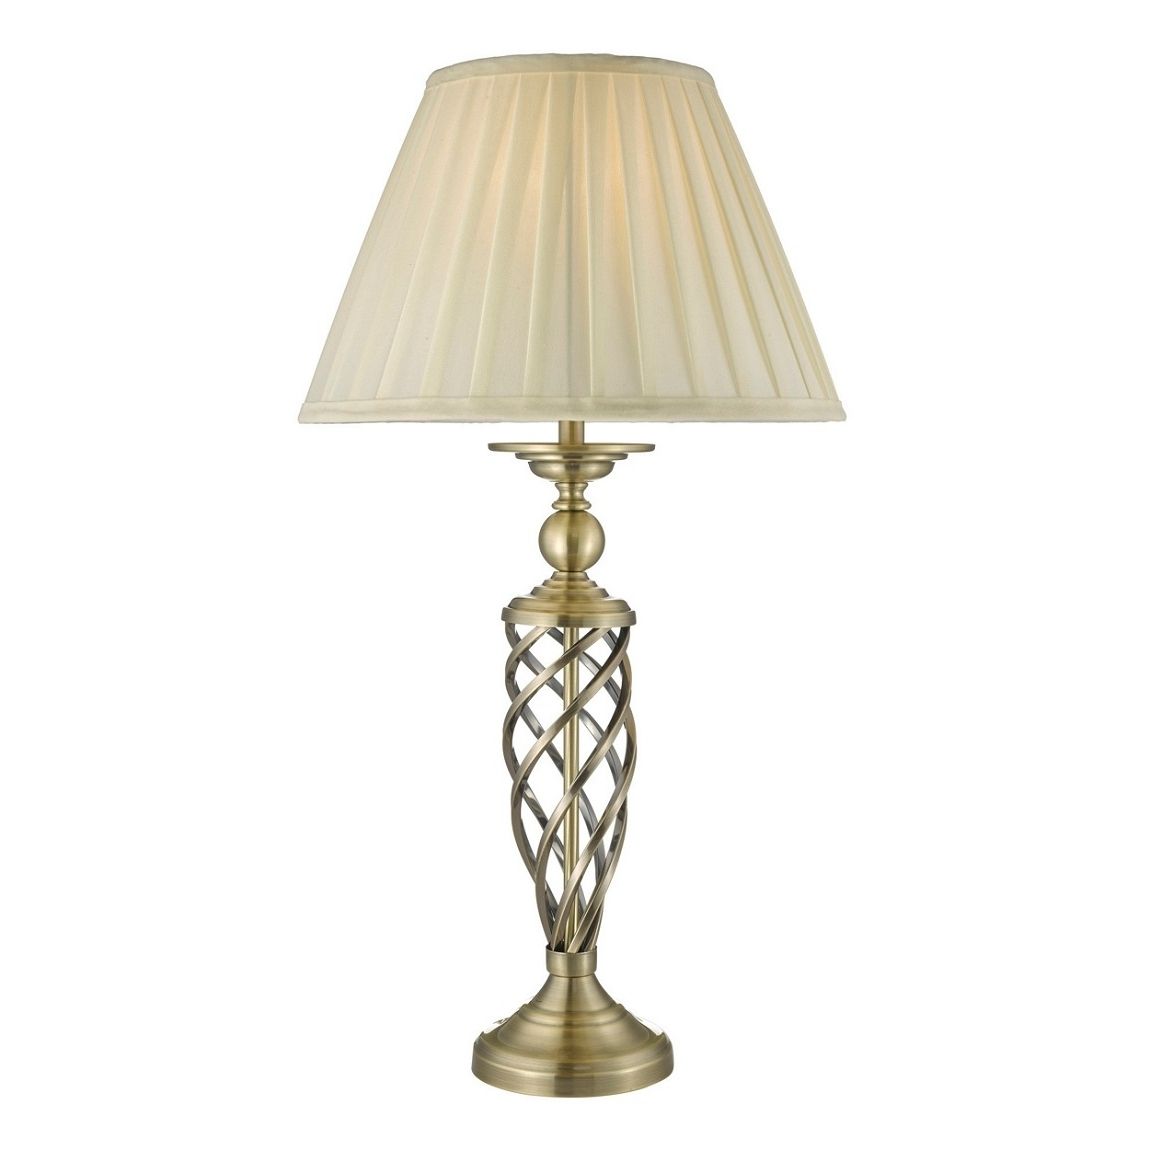 Well Known Debenhams Home Collection Jayce Table Light Desk Lamp Antique Brass Regarding Debenhams Table Lamps For Living Room (View 2 of 20)